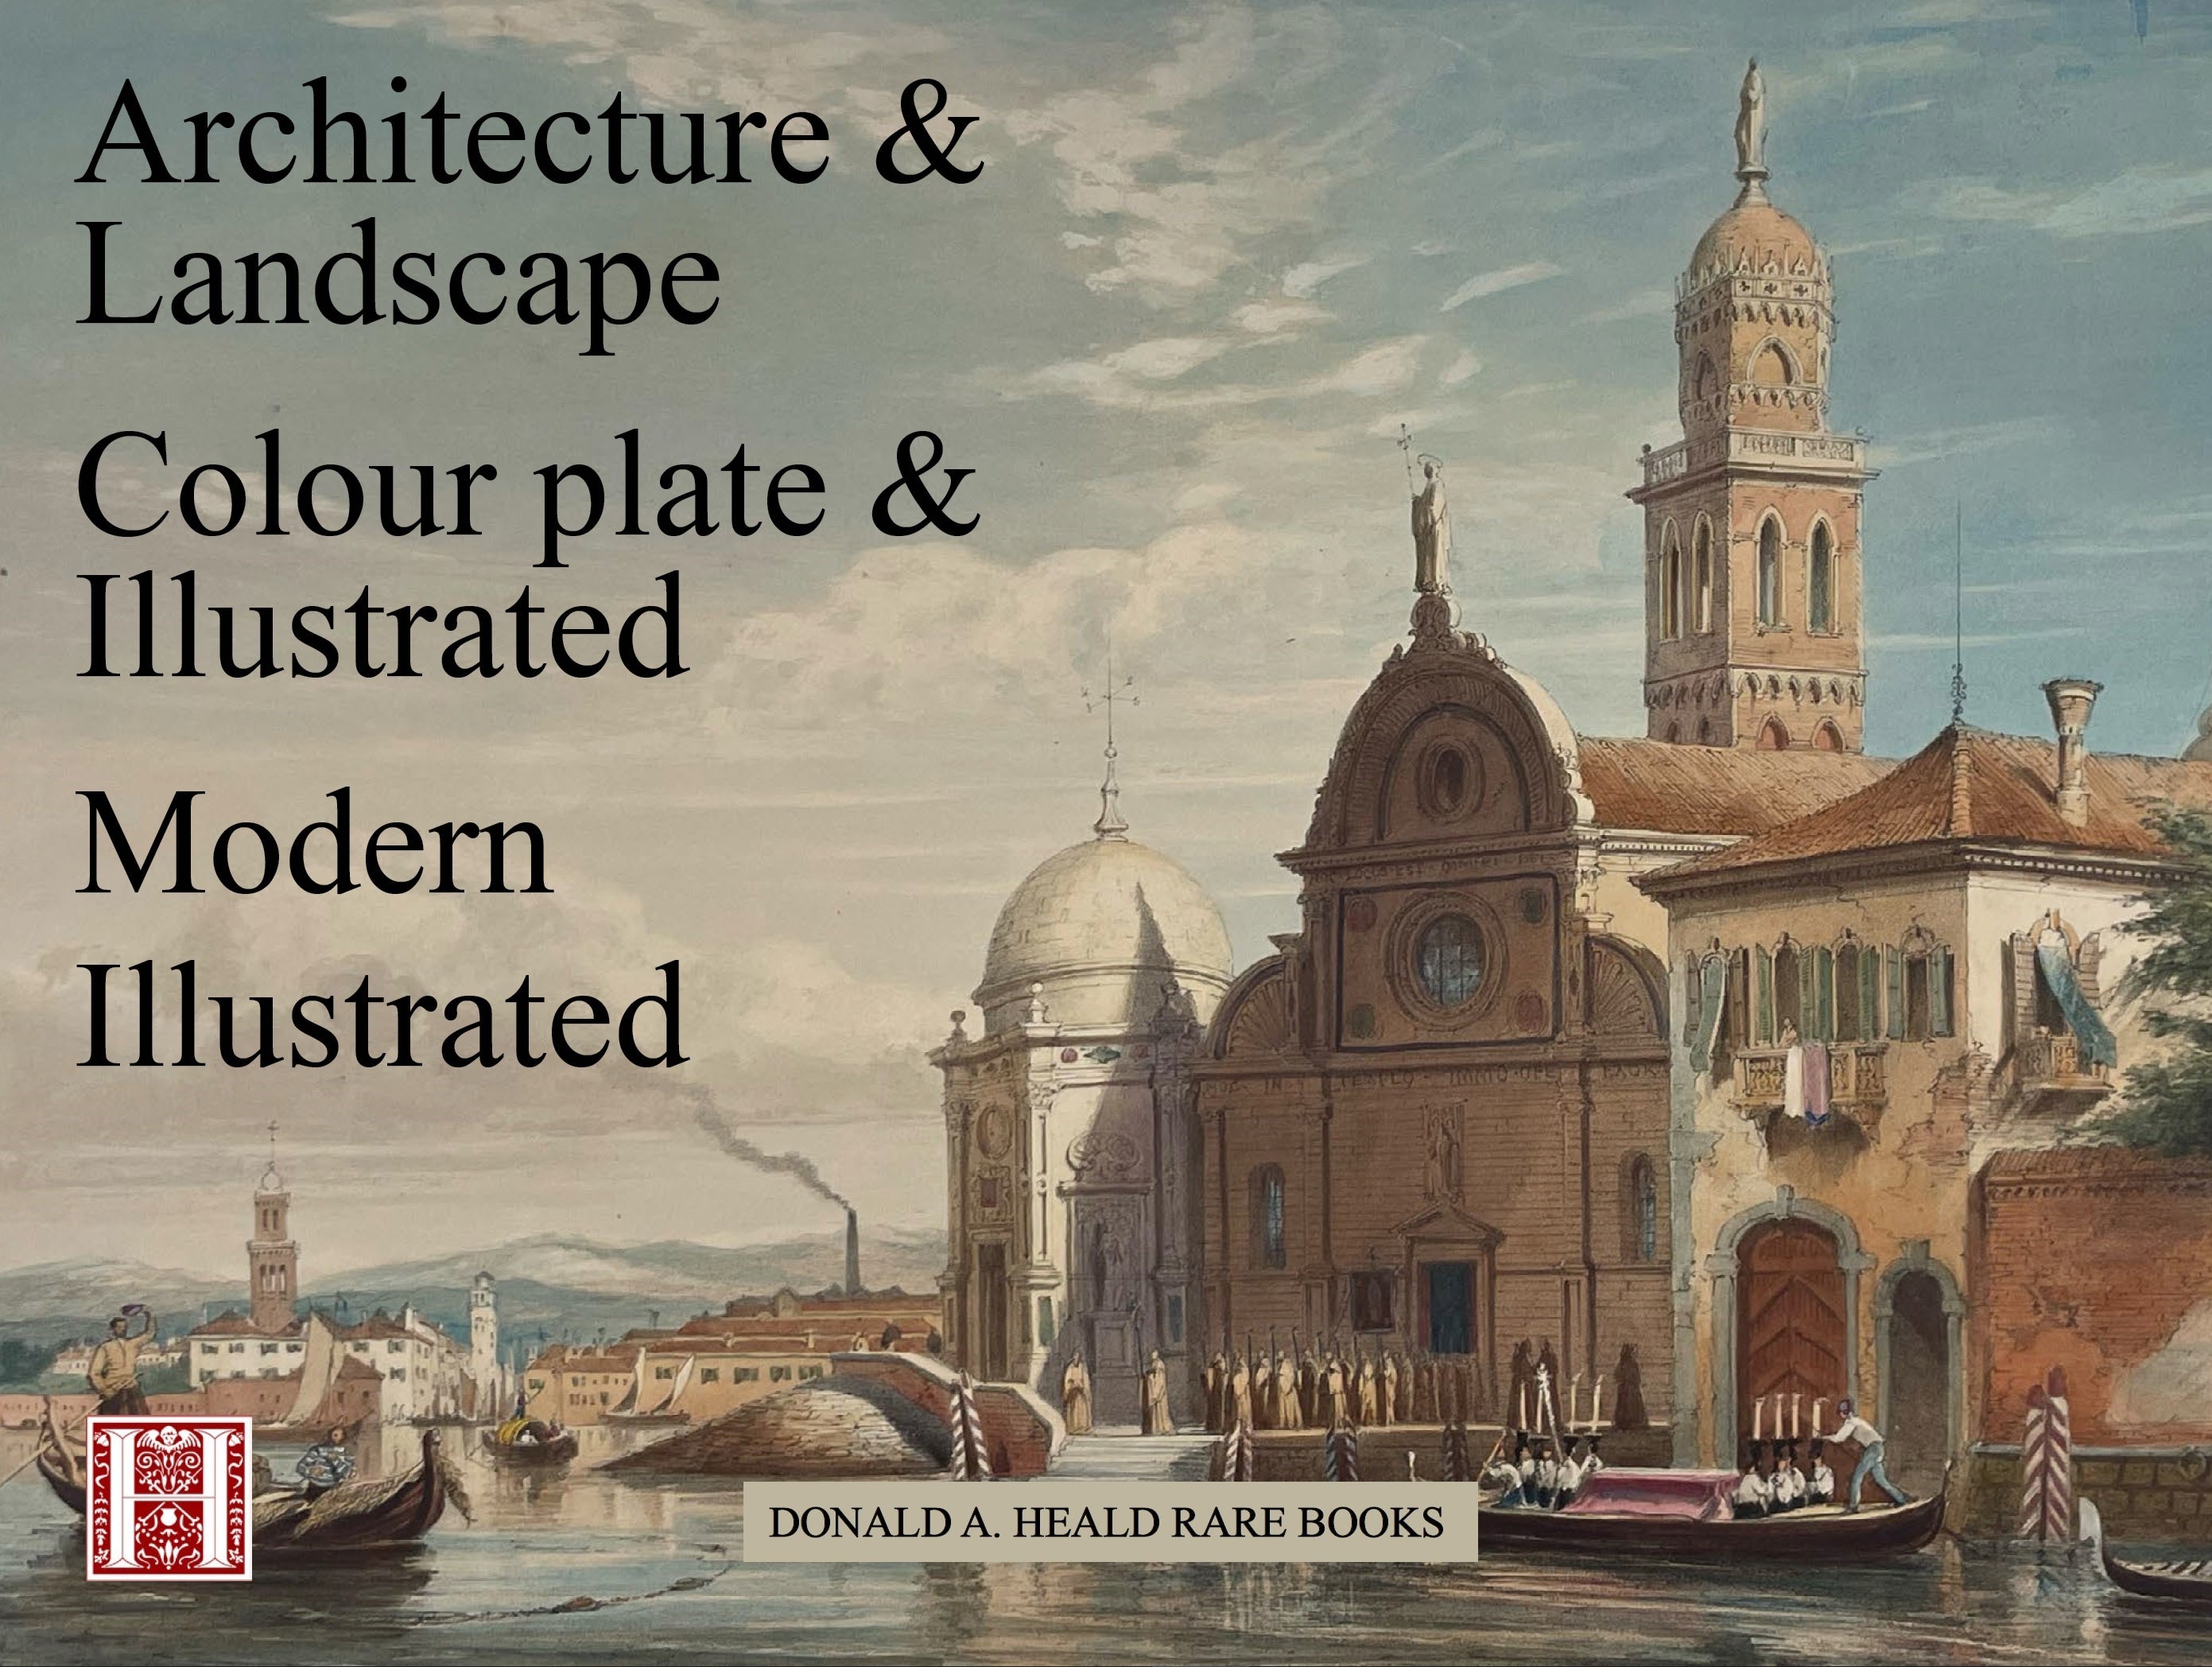 Architecture and Landscape, Colour Plate and Illustrated, Modern Illustrated